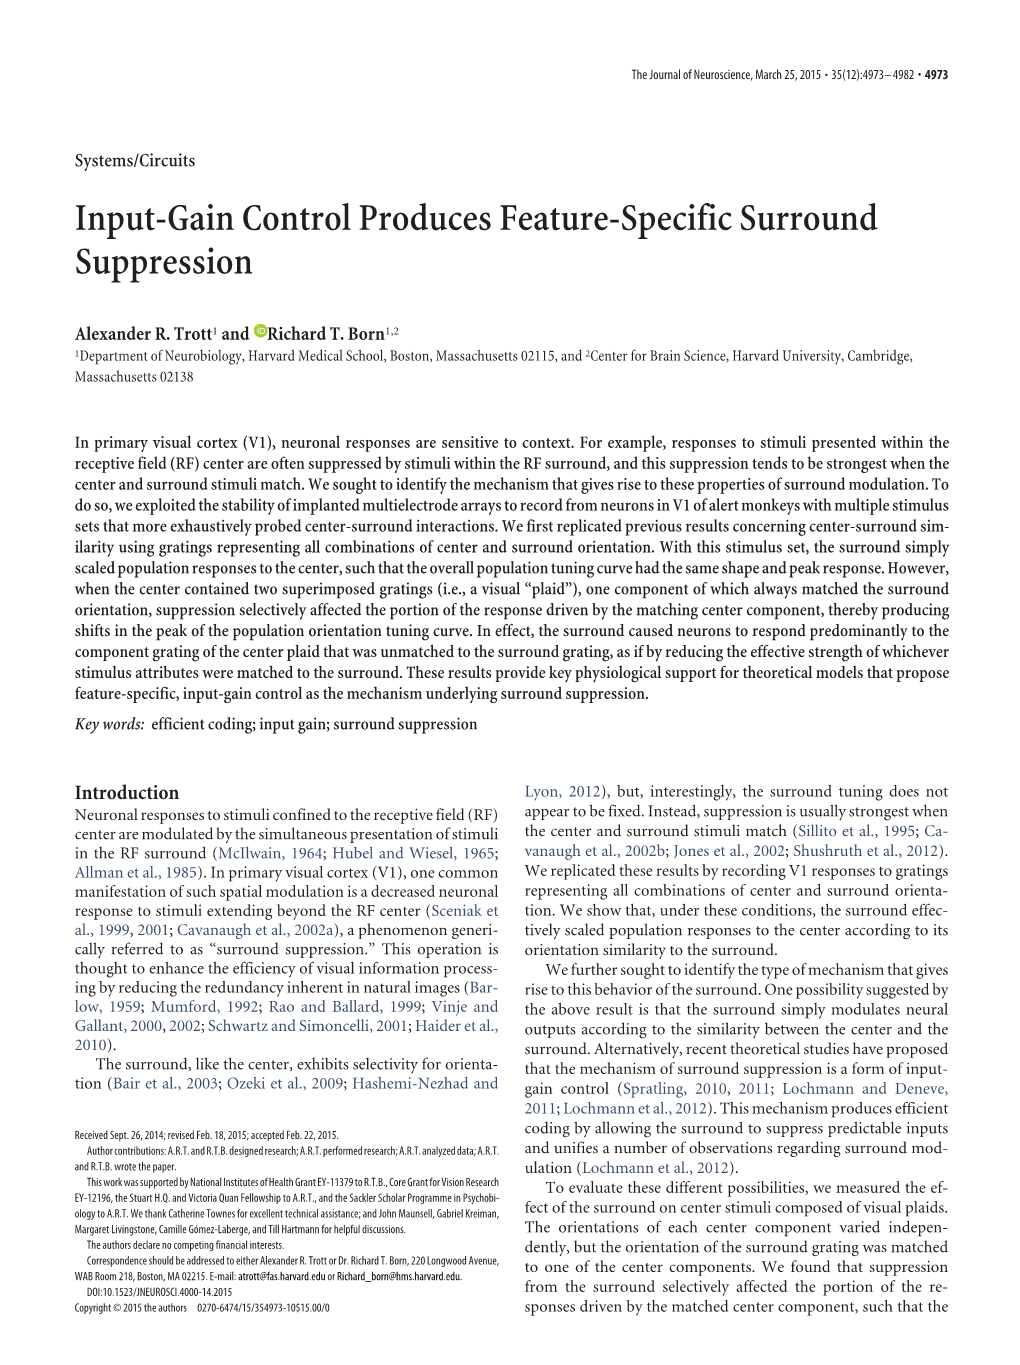 Input-Gain Control Produces Feature-Specific Surround Suppression